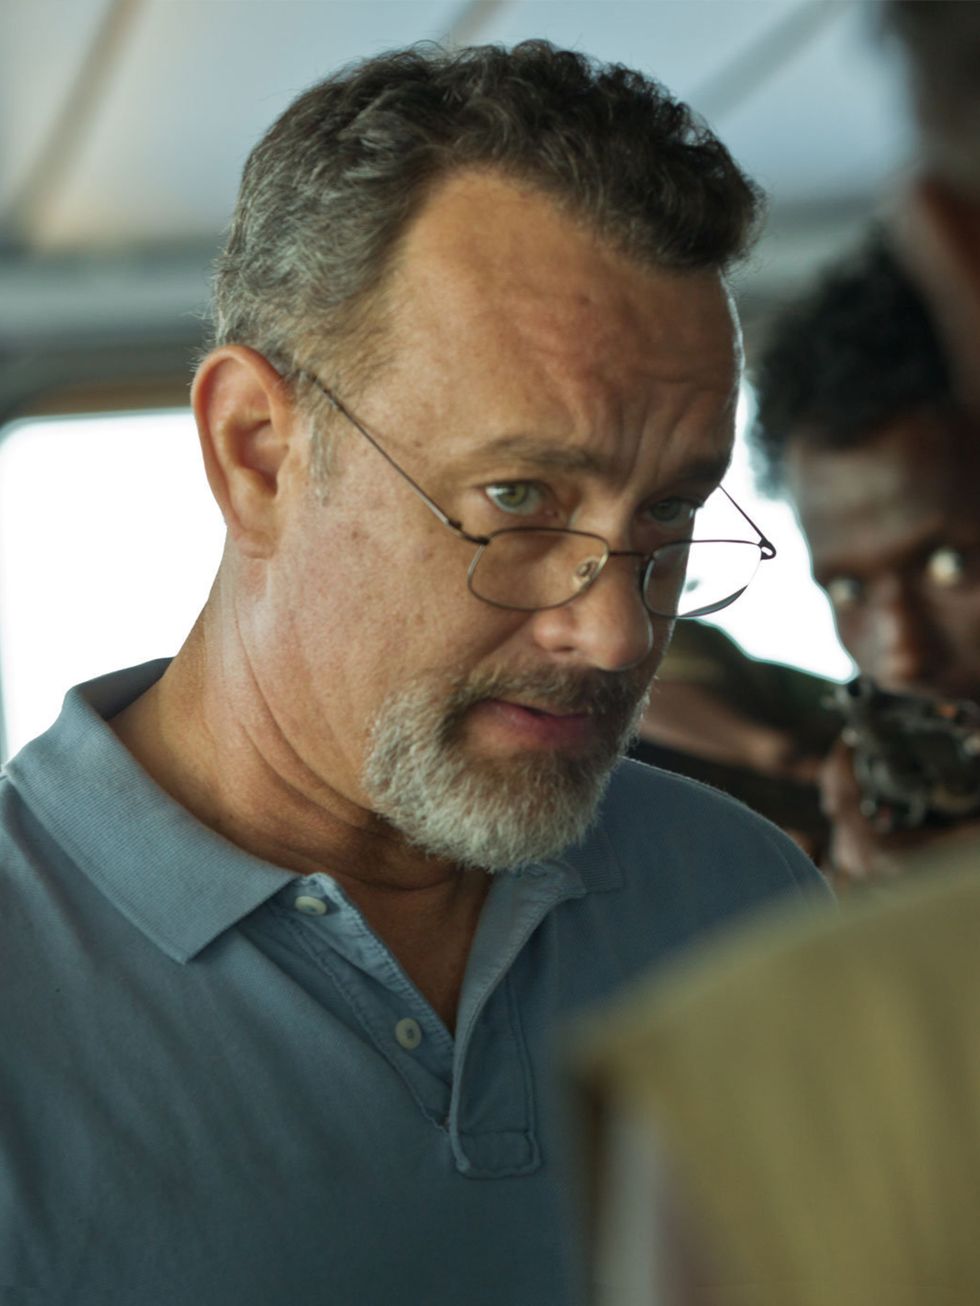 <p><strong>Film: Captain Phillips</strong> Fans of the Bourne trilogy, listen up. Looks like director Paul Greengrass is on to another winner. This time <a href="http://www.elleuk.com/star-style/news/london-film-festival-kicks-off-tom-hanks-tom-ford-openi